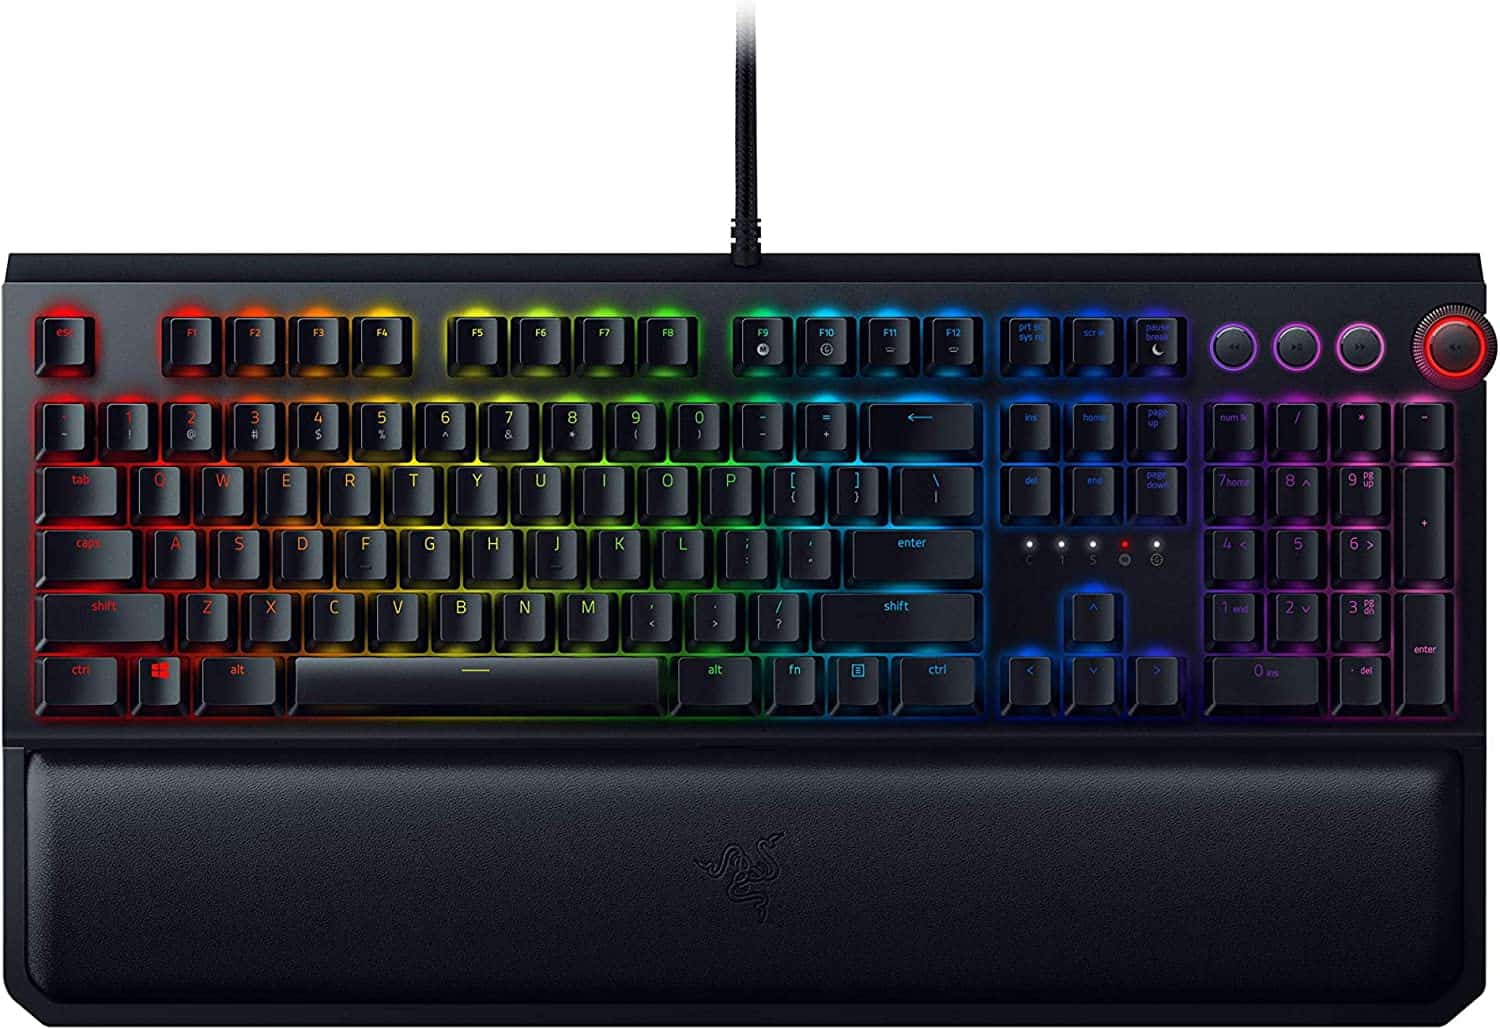 Which Gaming Keyboard Is Quietest?